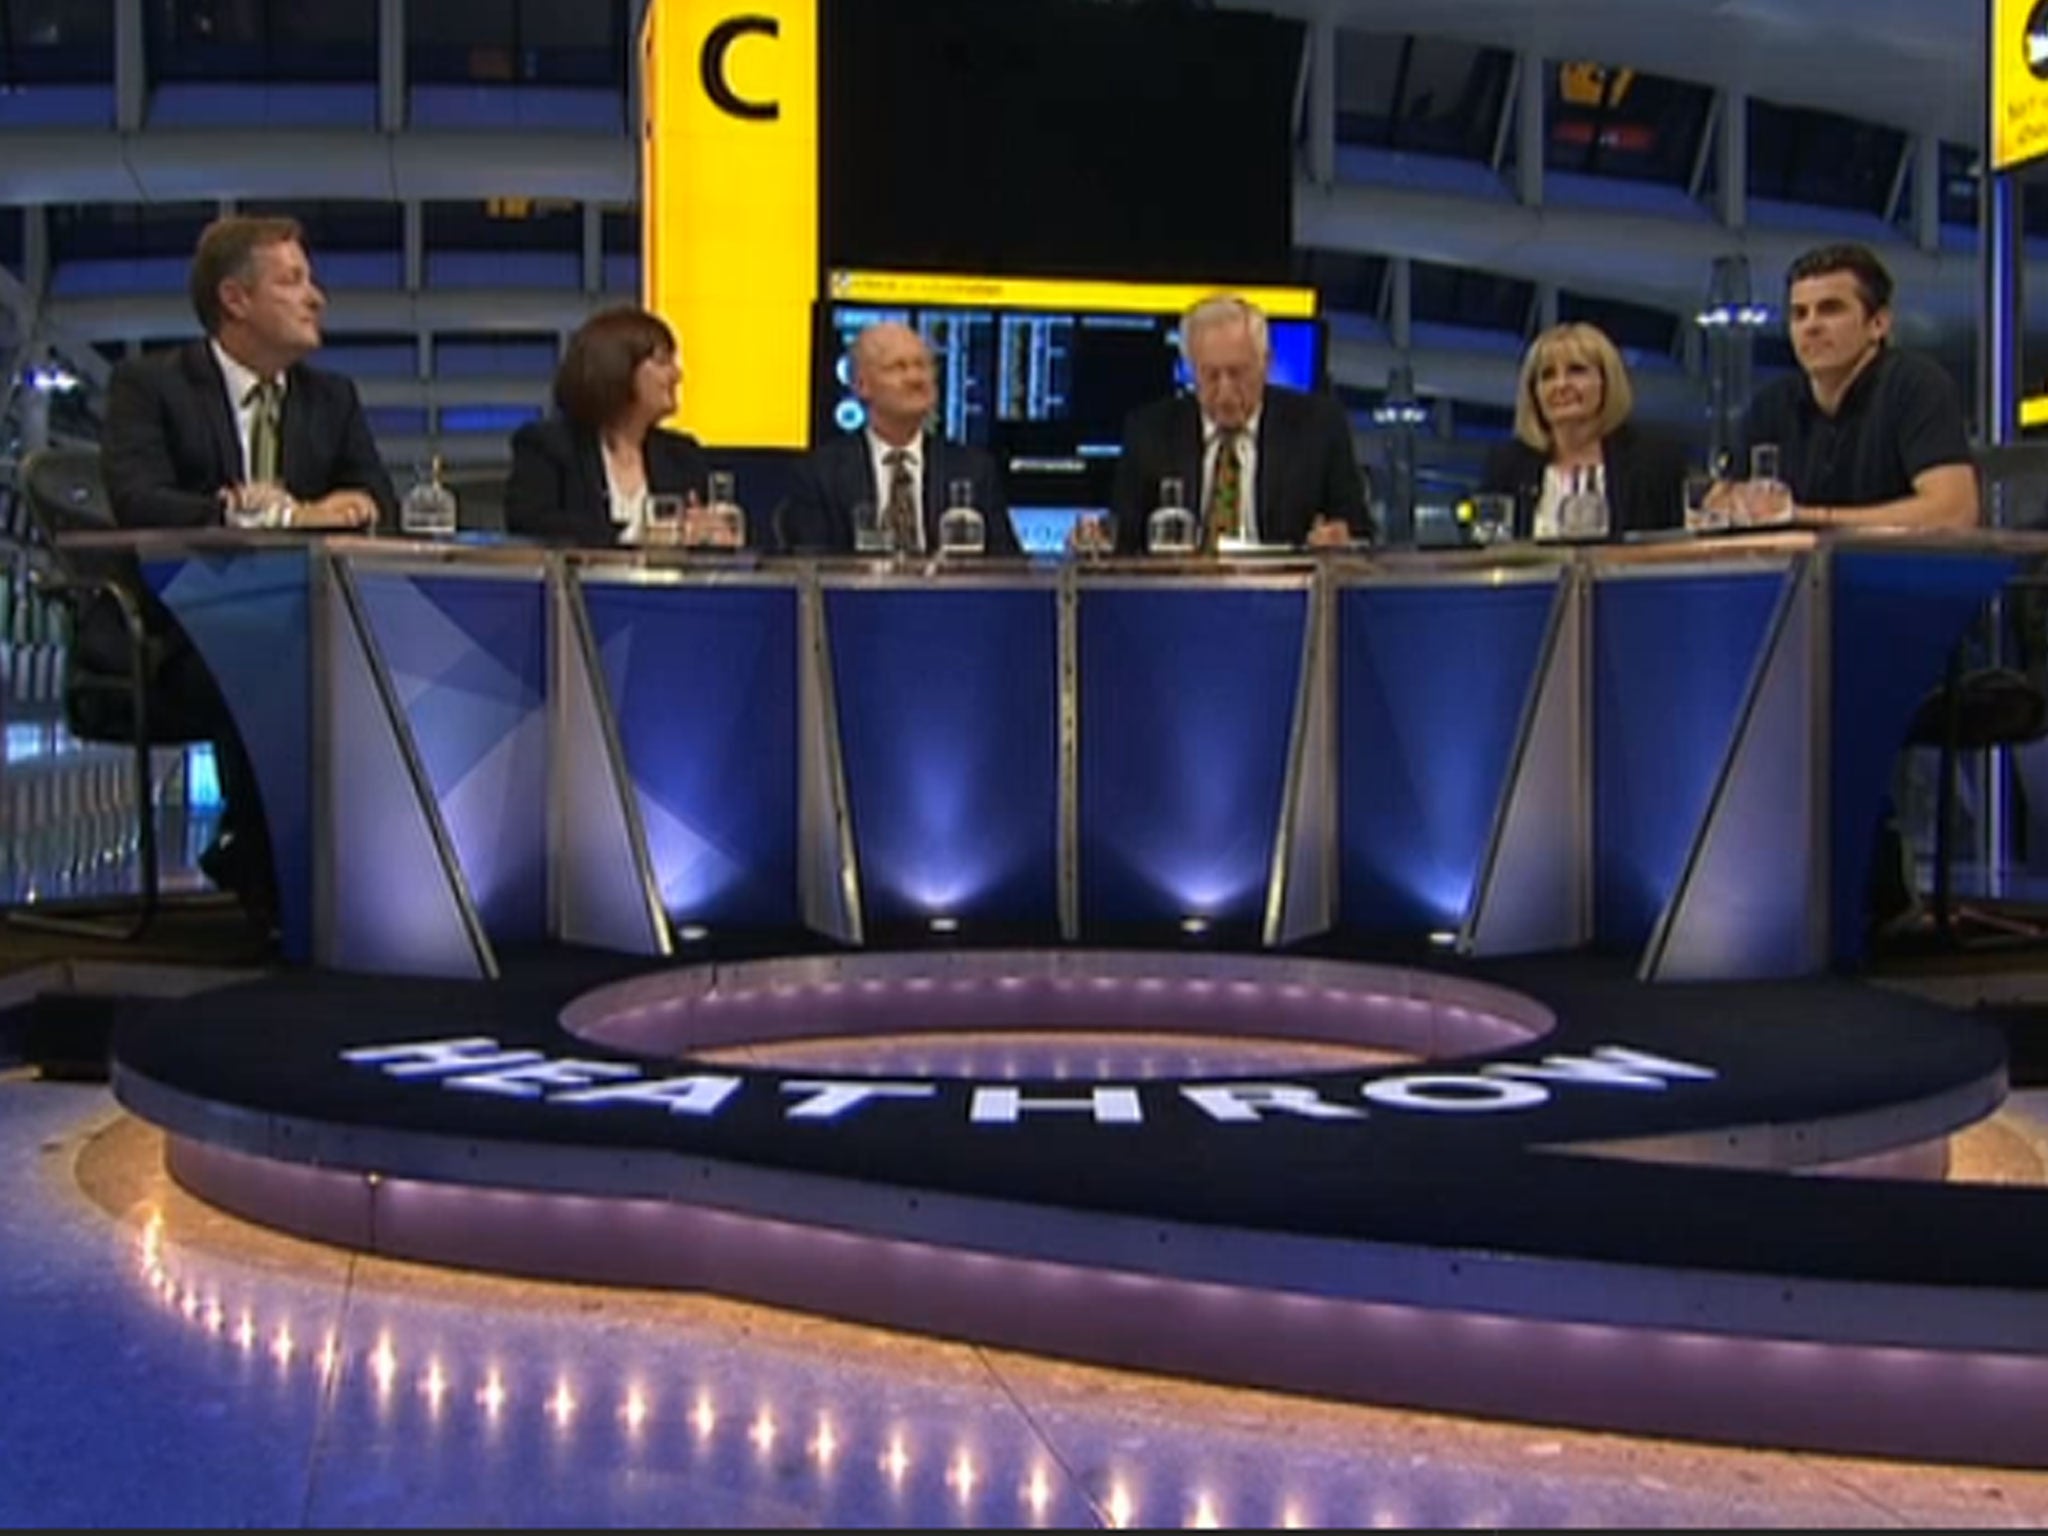 Piers Morgan, Louise Bours, David Willetts MP, chair David Dimbleby, Margaret Curran MP and Joey Barton on BBC Question Time at Heathrow